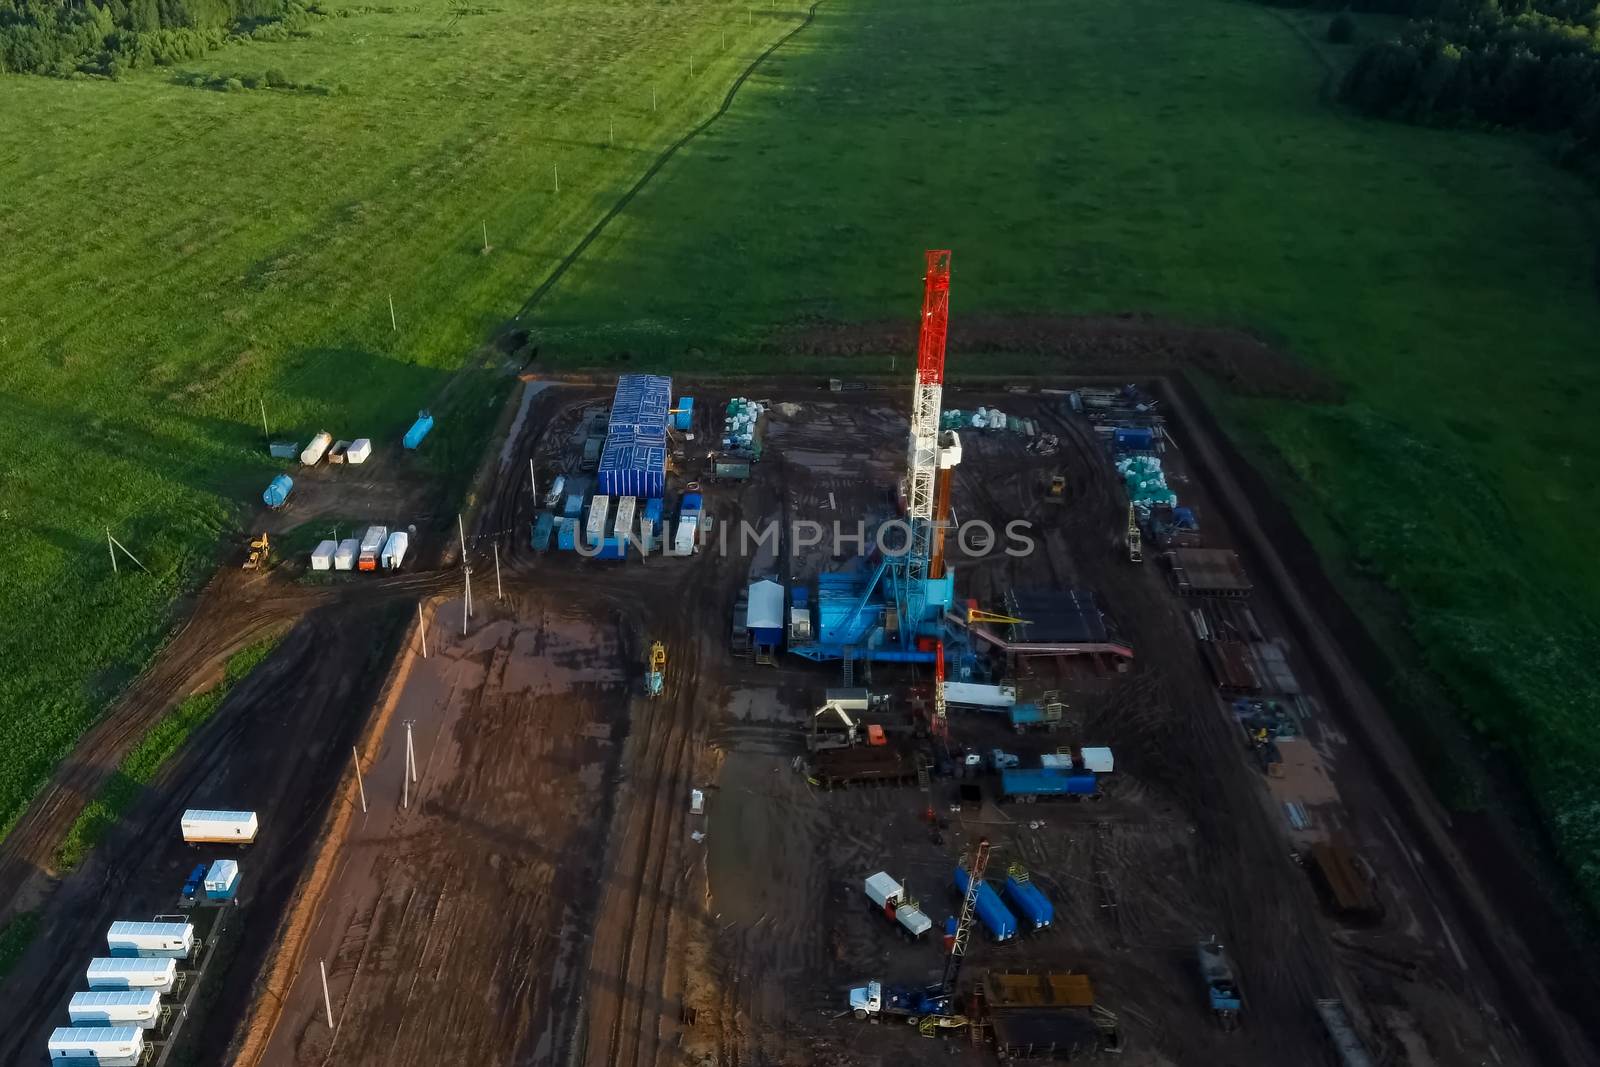 Drilling rig for oil and gas well drilling. Drilling rig for oil and gas well drilling.